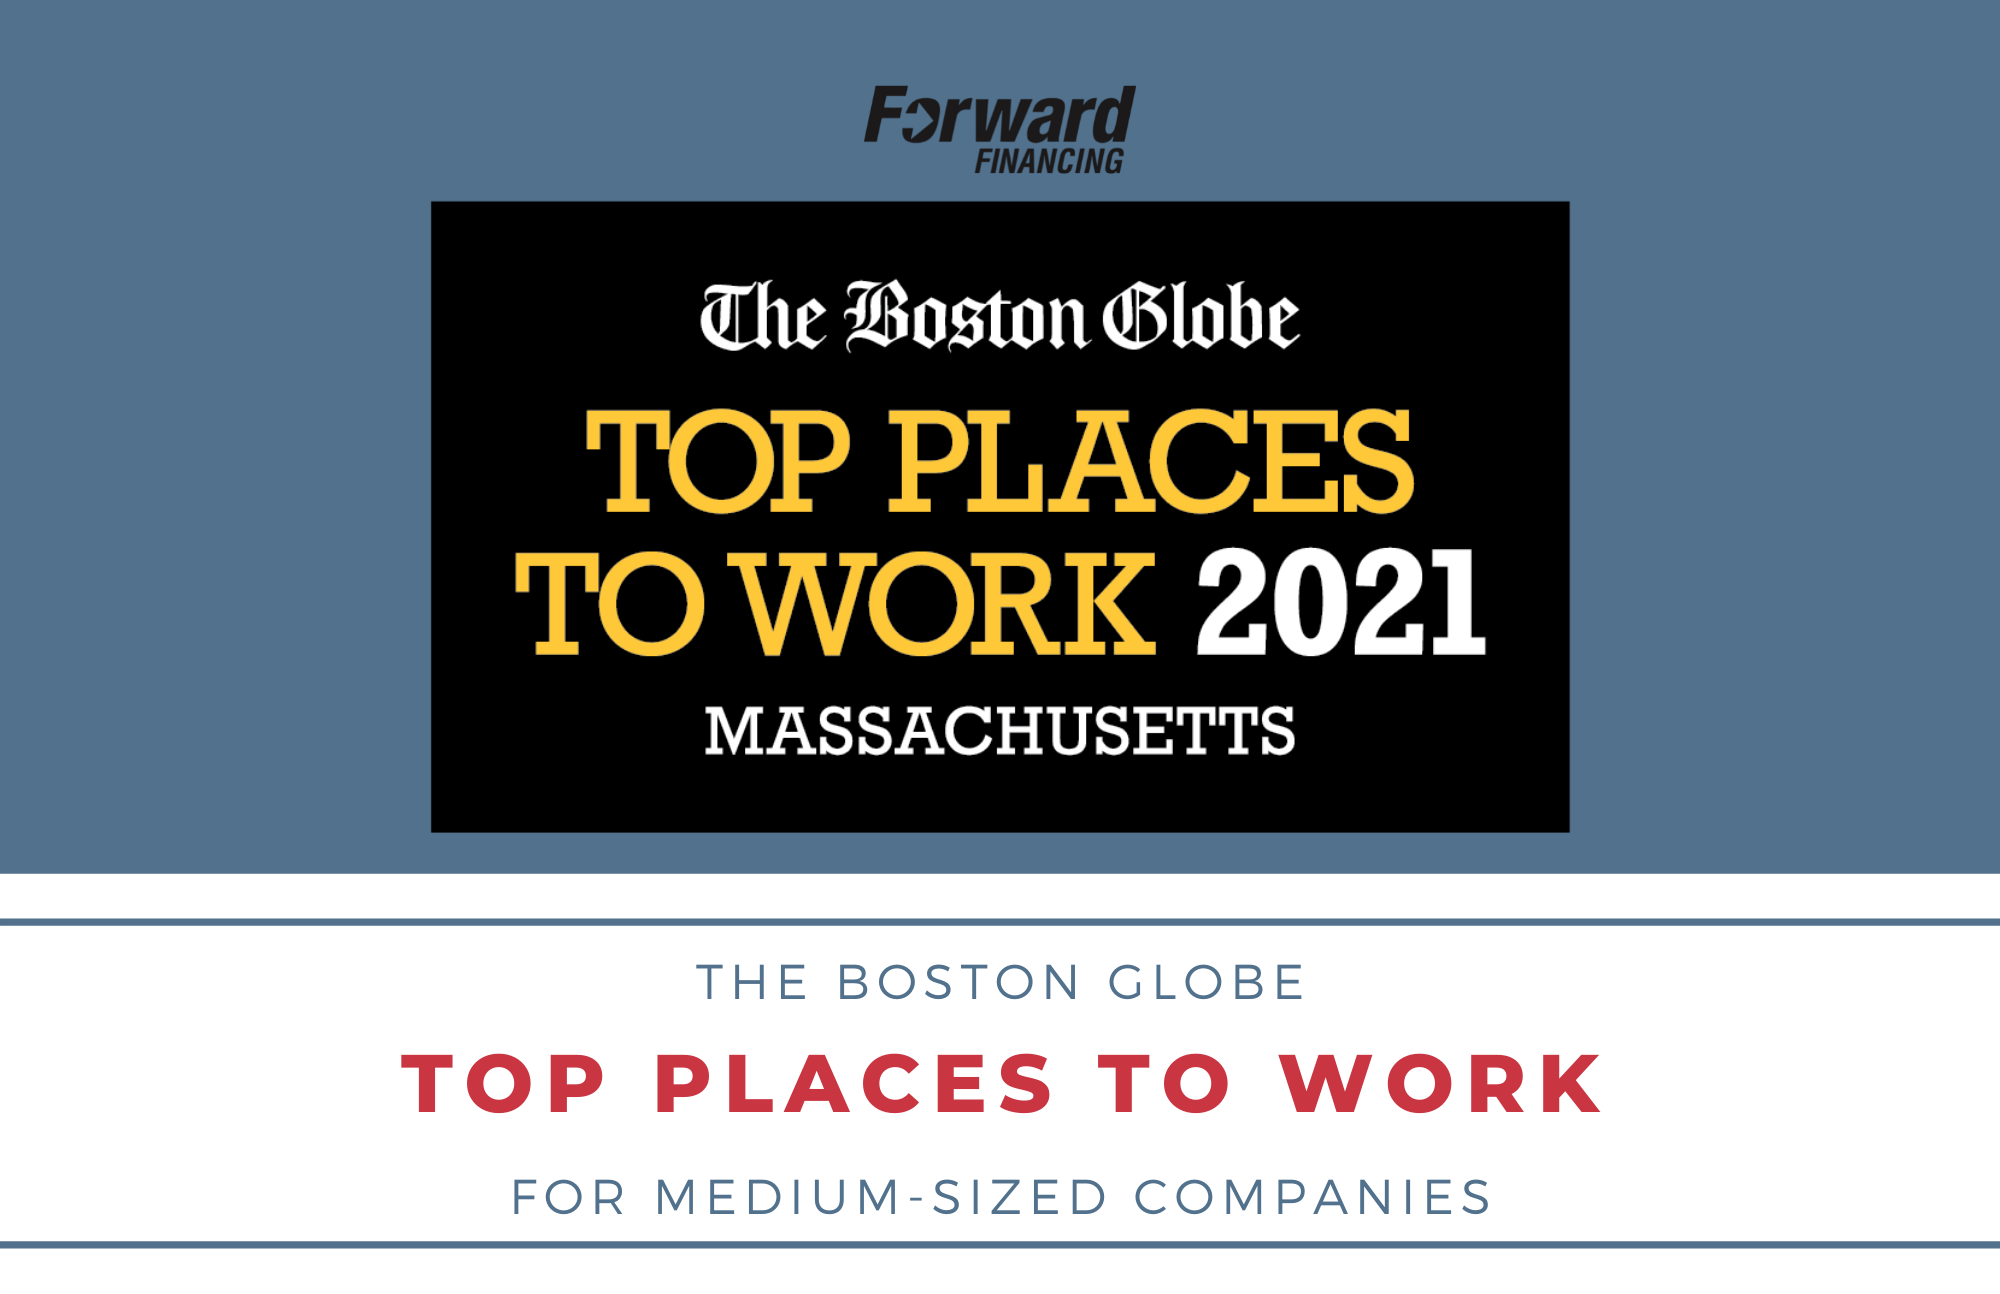 Forward Financing Named a 2021 Top Place to Work by The Boston Globe Image